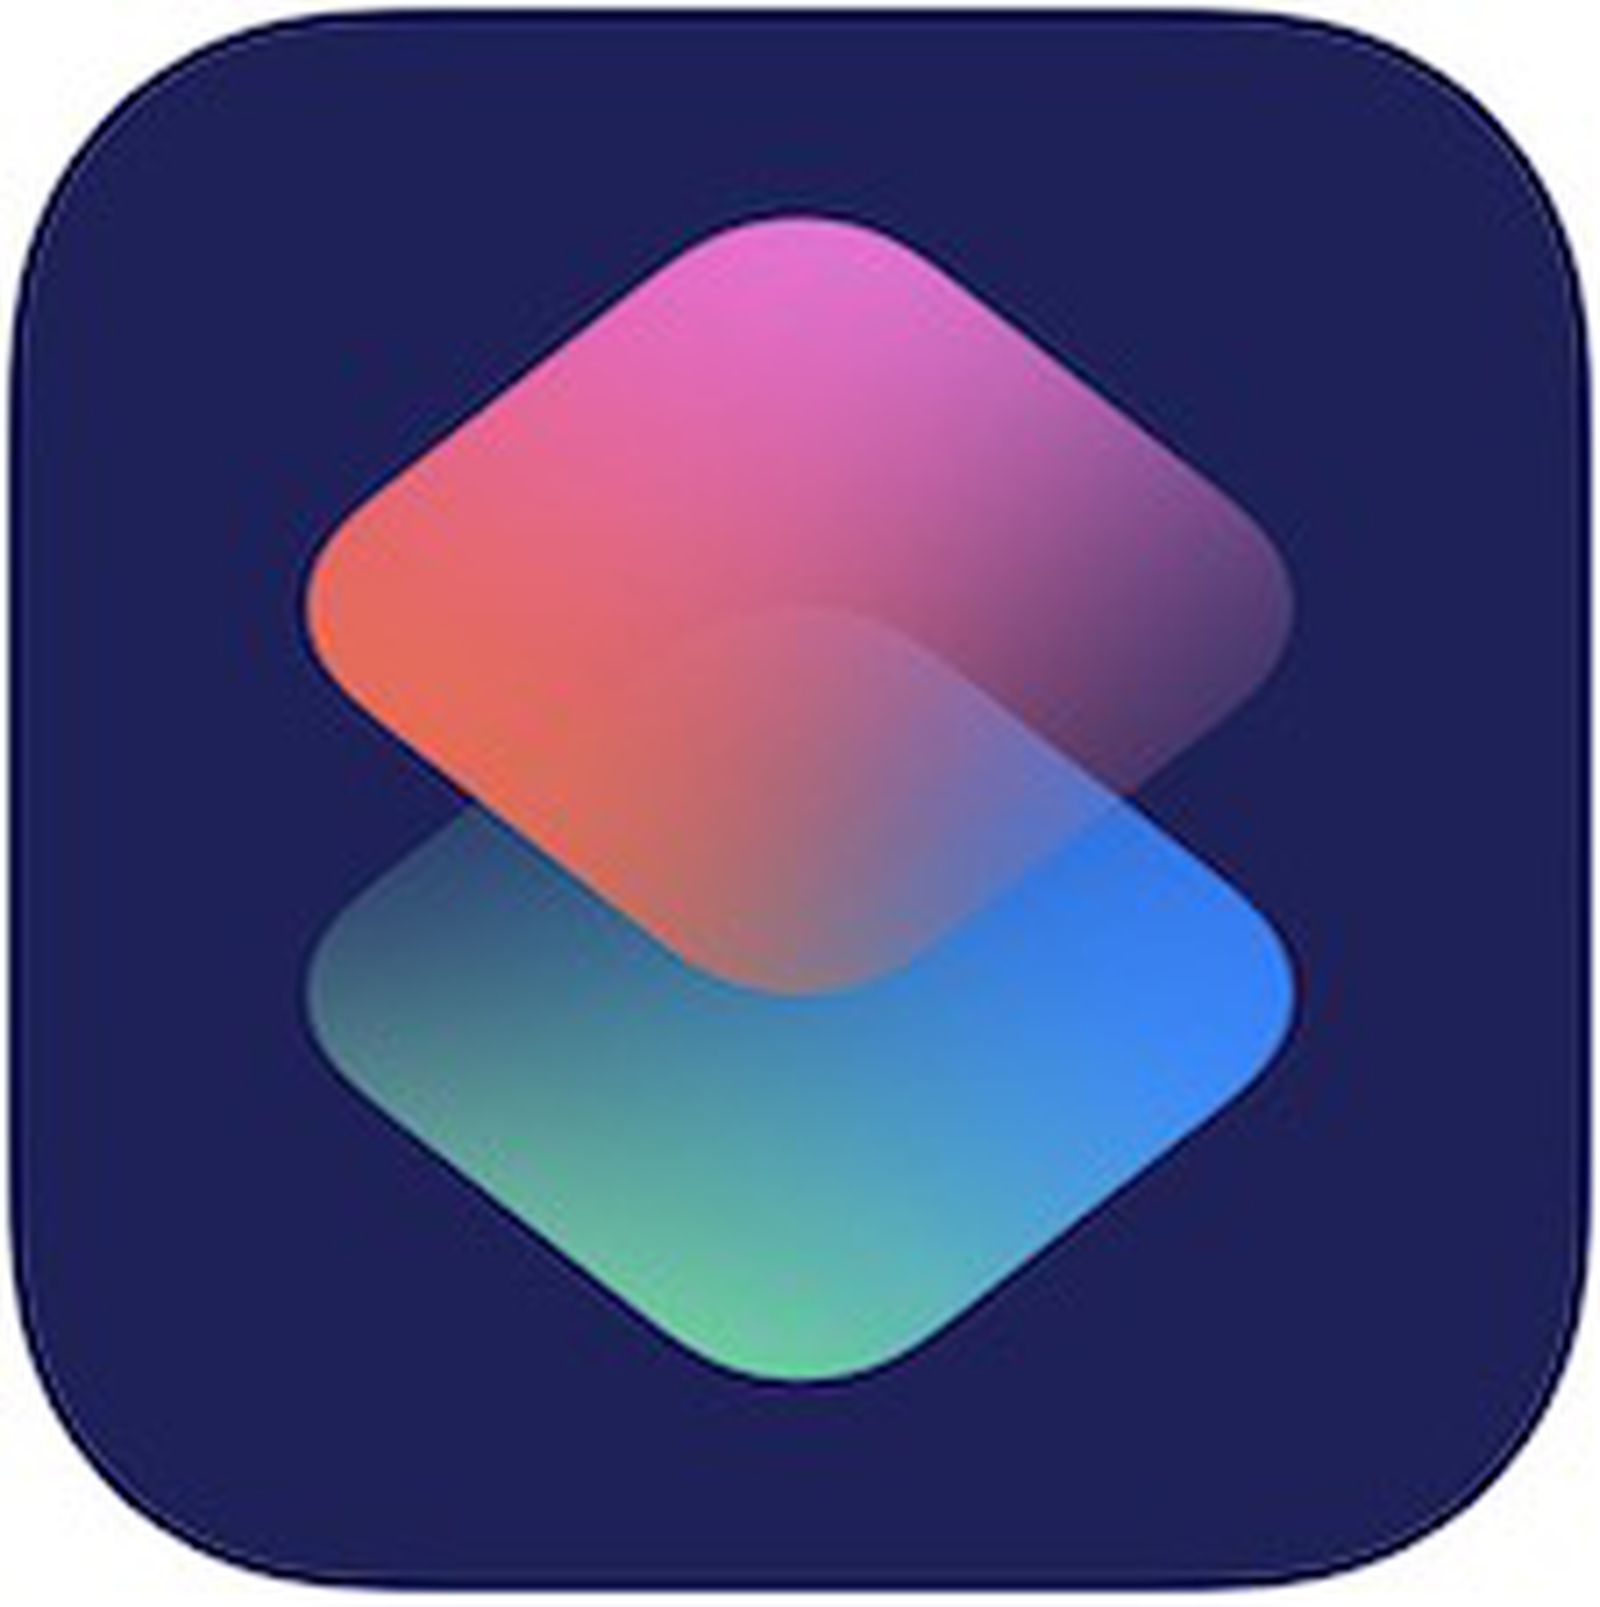 for ios download Shotcut 23.11.29